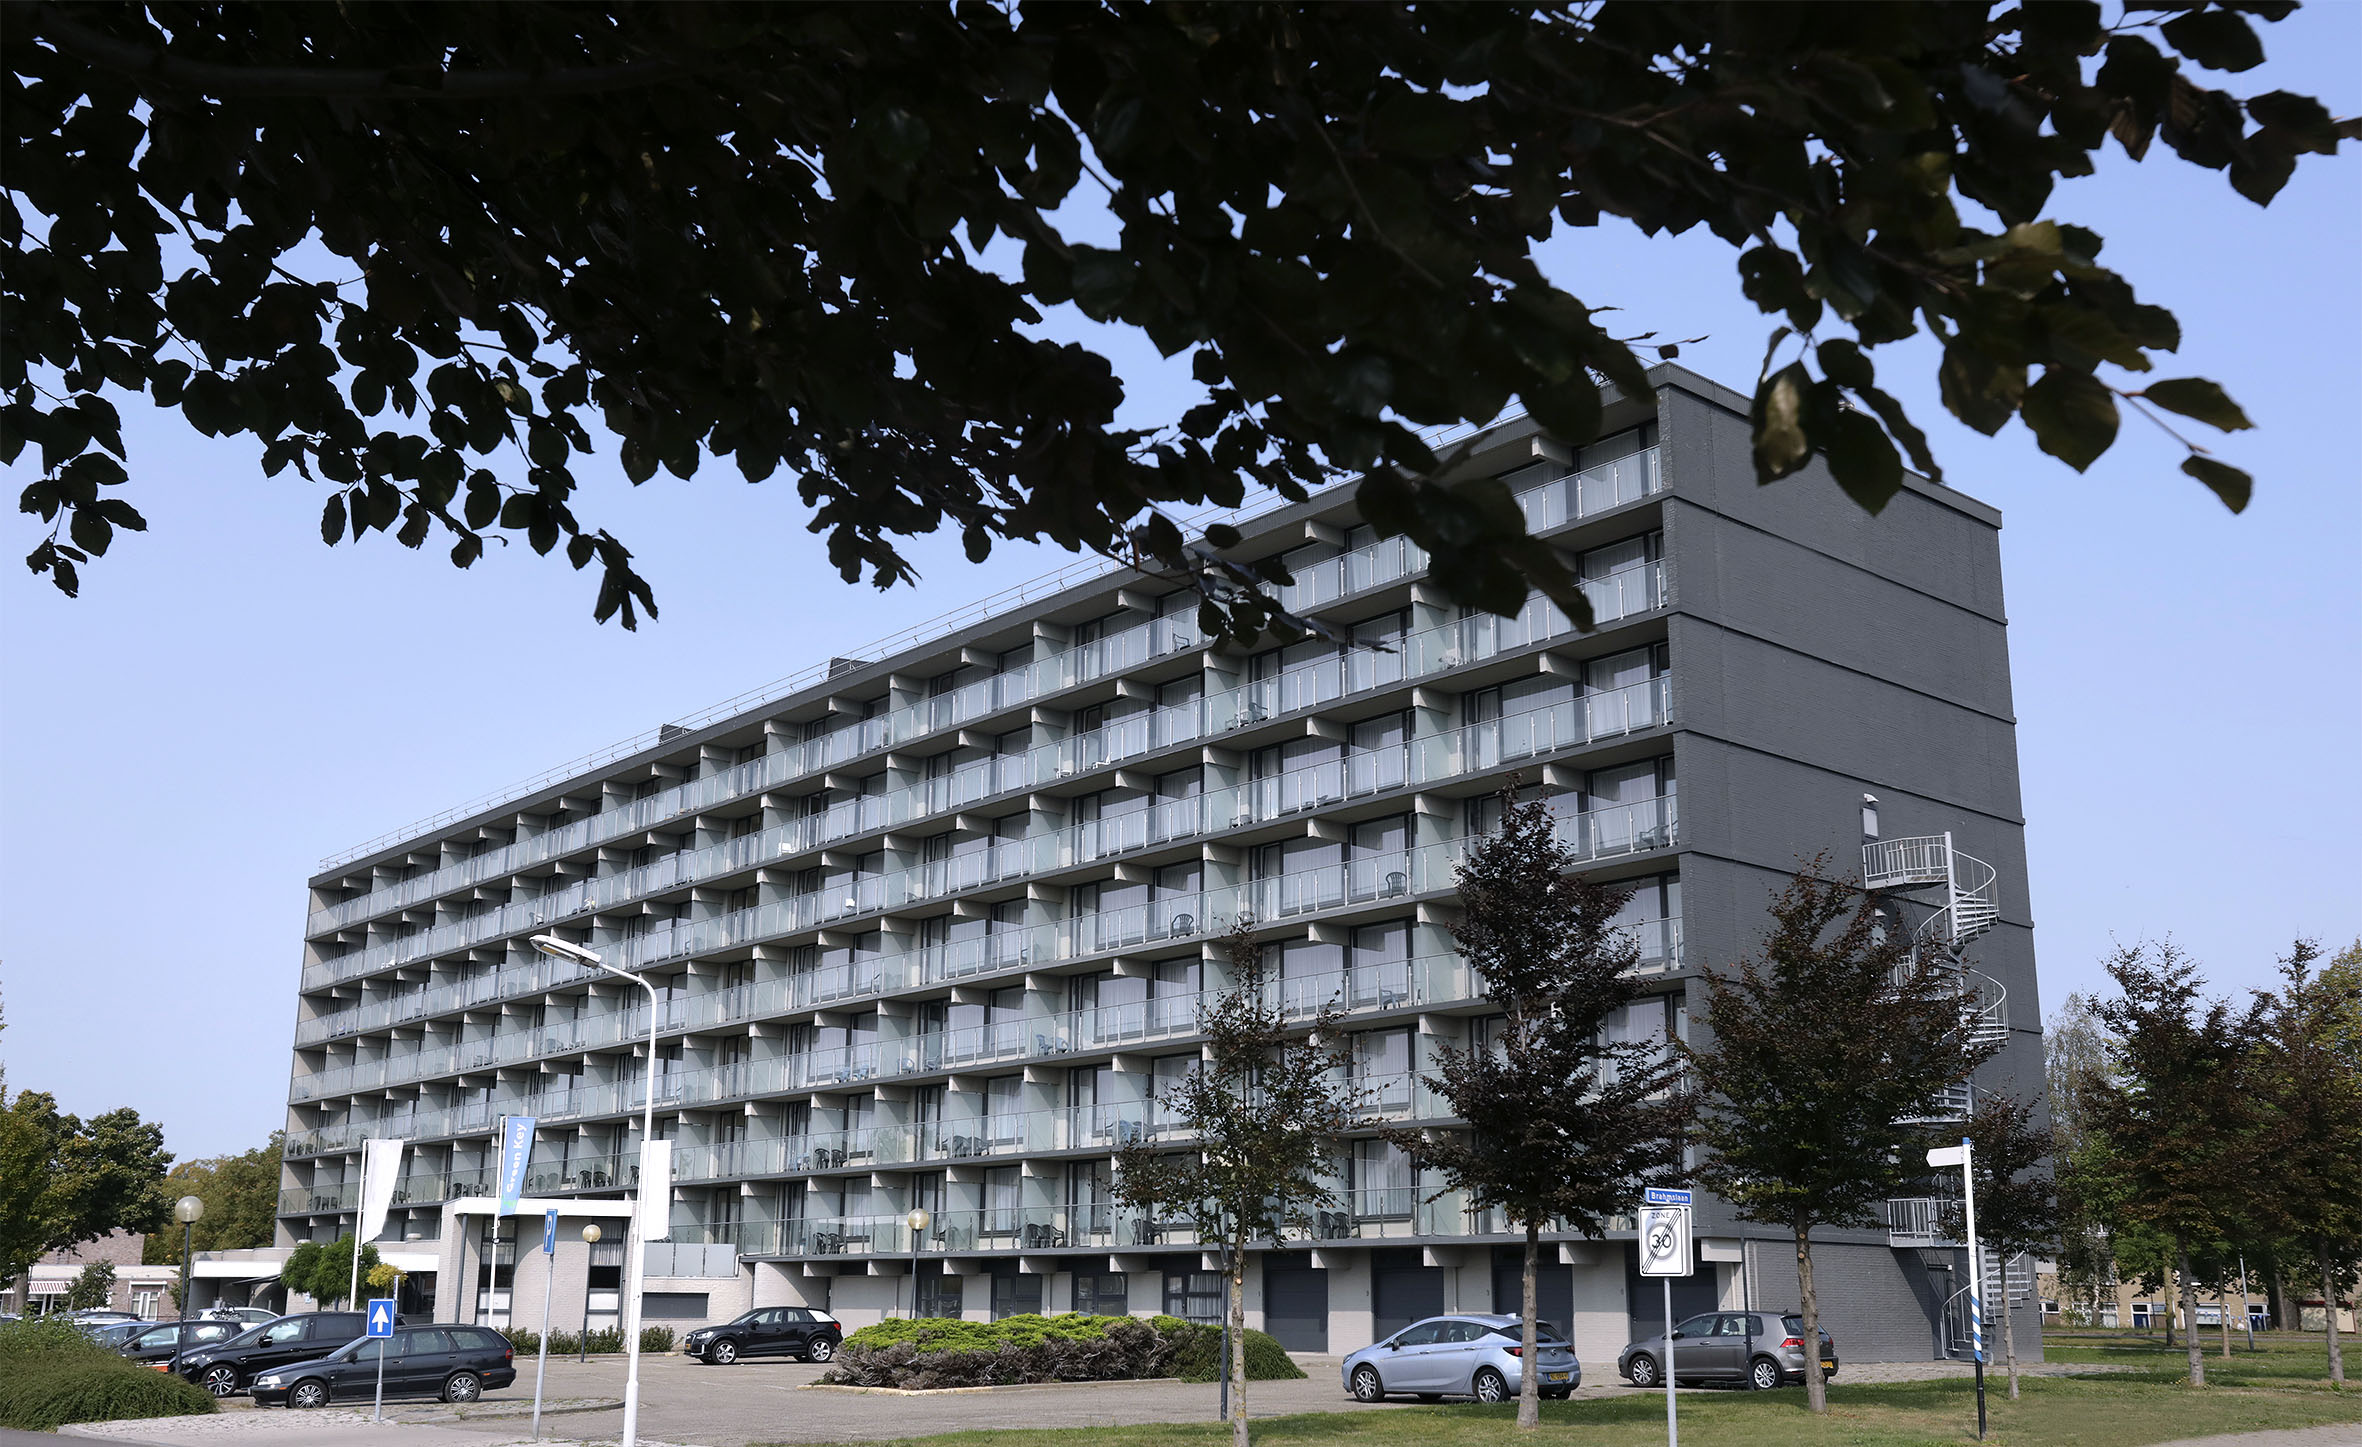 City Hotel Terneuzen <br/>99.00 ew <br/> <a href='http://vakantieoplossing.nl/outpage/?id=f65648ad9deea2257ebcee38dadd153d' target='_blank'>View Details</a>